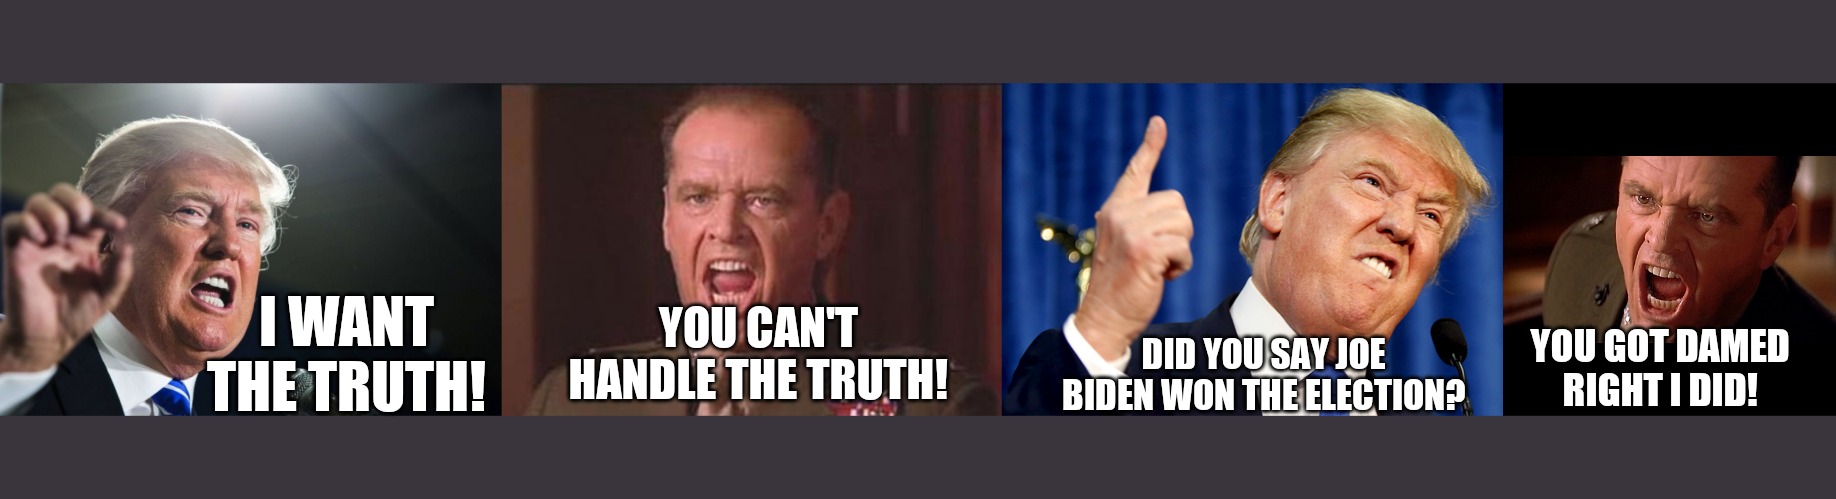 YOU CAN'T HANDLE THE TRUTH! DID YOU SAY JOE BIDEN WON THE ELECTION? I WANT THE TRUTH! YOU GOT DAMED RIGHT I DID! | image tagged in donald trump,a few good men,colonel jessup screaming in a few good men | made w/ Imgflip meme maker